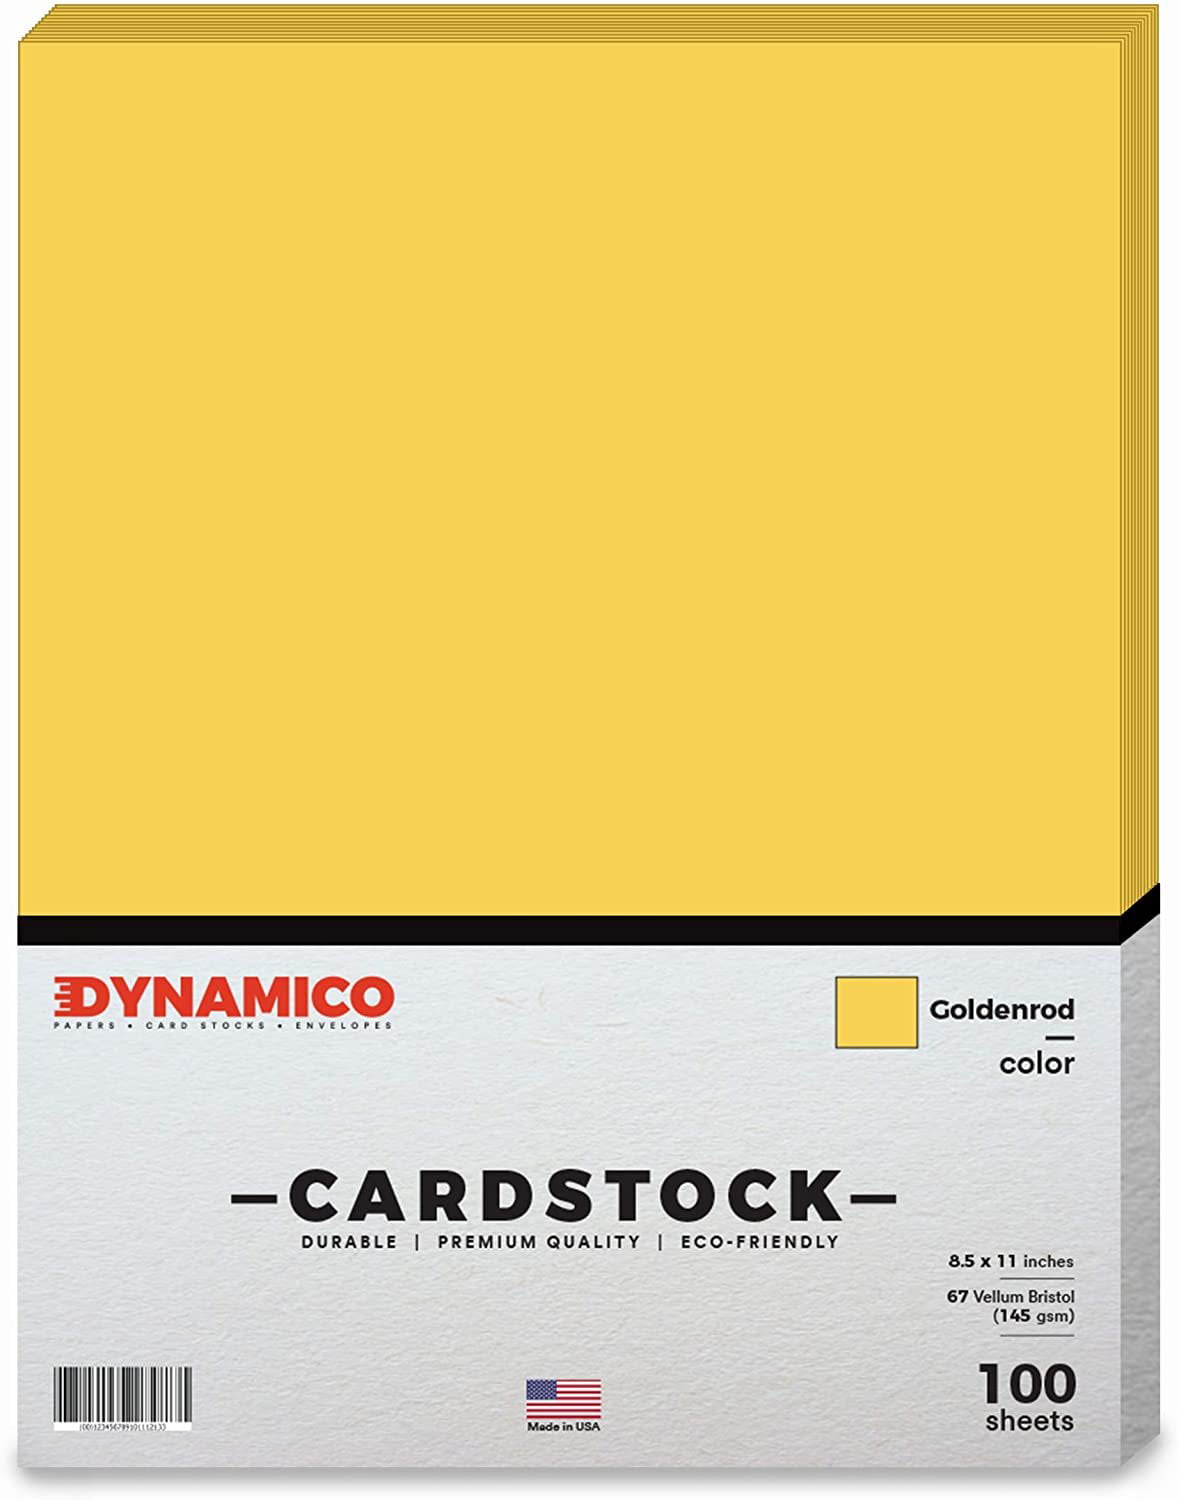 Dynamico goldenrod pastel color cardstock paper - great for arts & crafts,  scrapbooking, flyers, posters